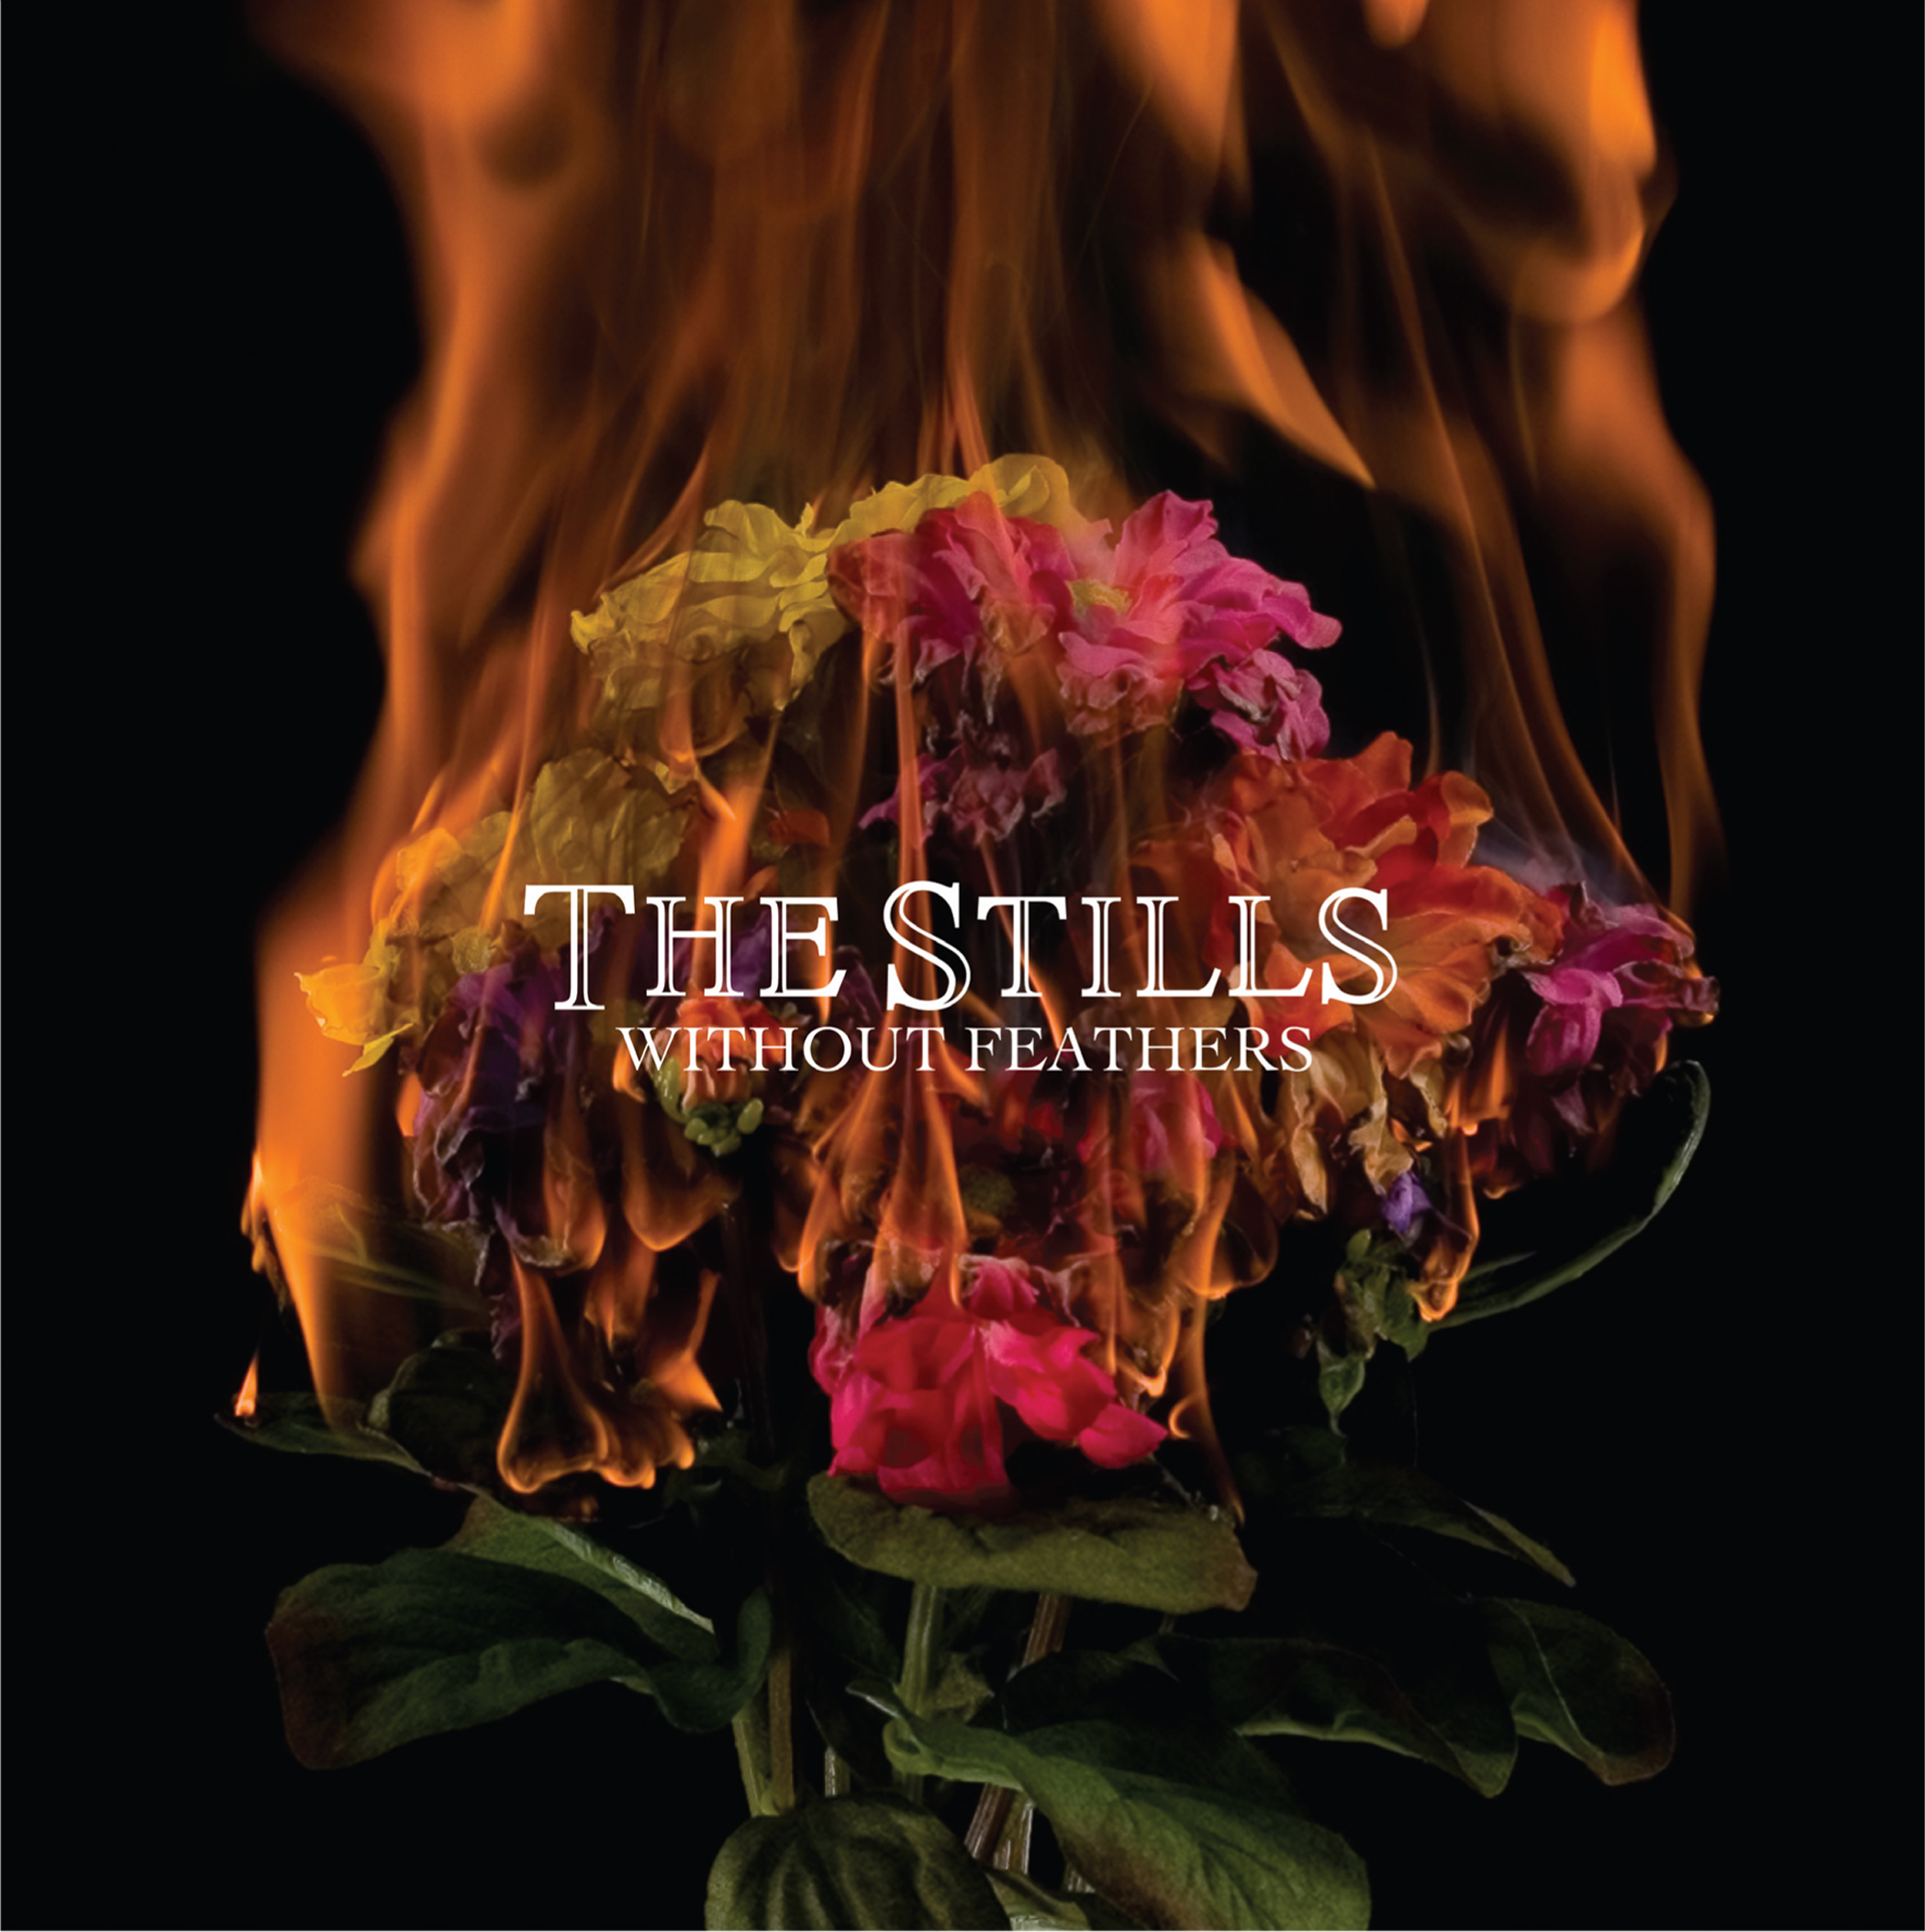 THE STILLS- 'WITHOUT FEATHERS' ALBUM